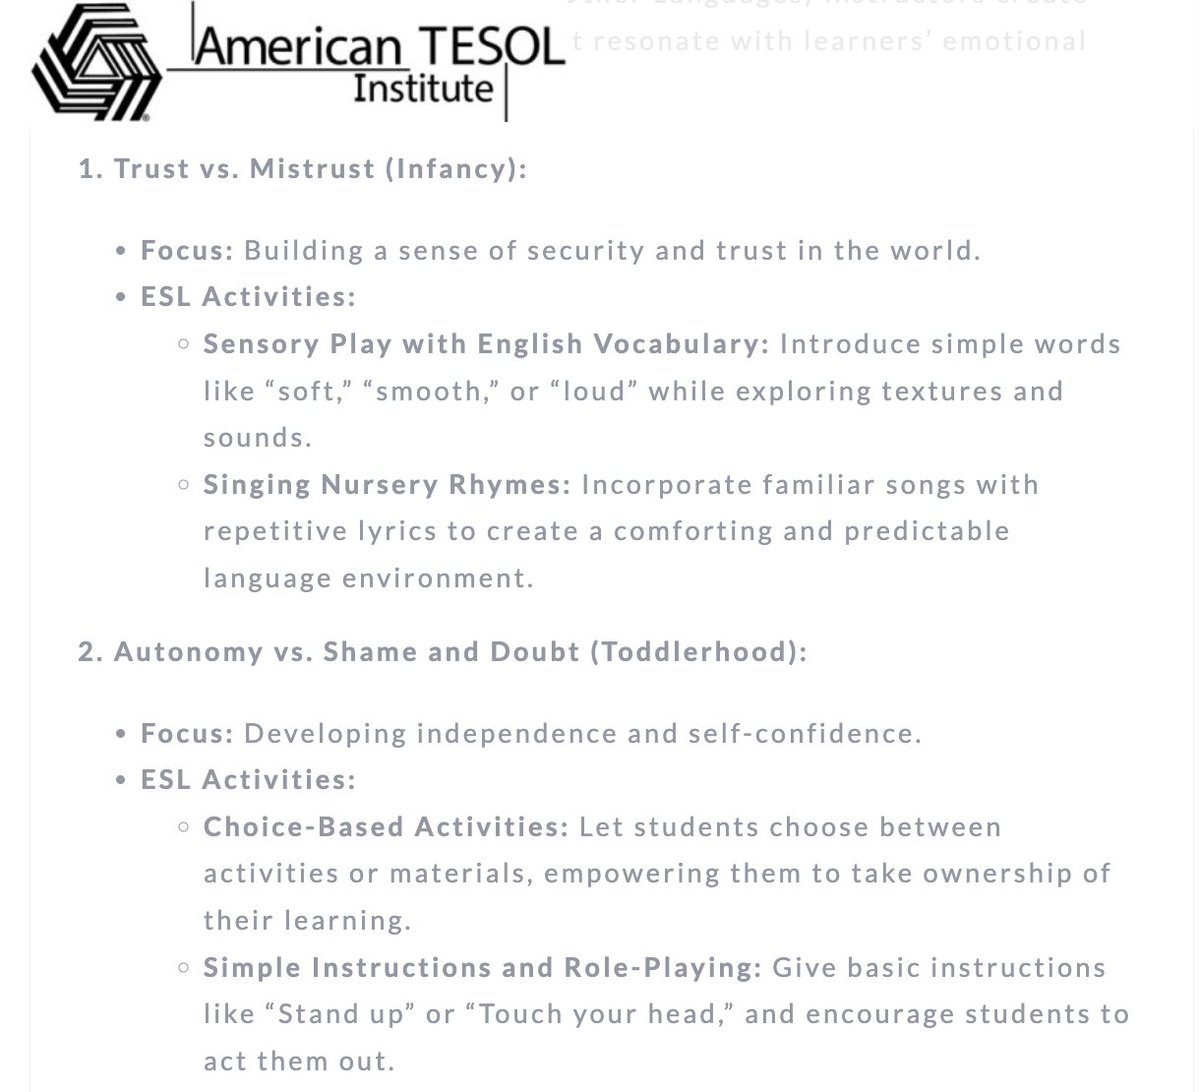 Erik Erikson’s theory of psychosocial development outlines 8 stages individuals pass through from infancy to adulthood. Understanding these stages can help #TESOL teachers create lessons that resonate with learners’ emotional & social needs. americantesol.com/blogger/psycho… #ESL #EFL